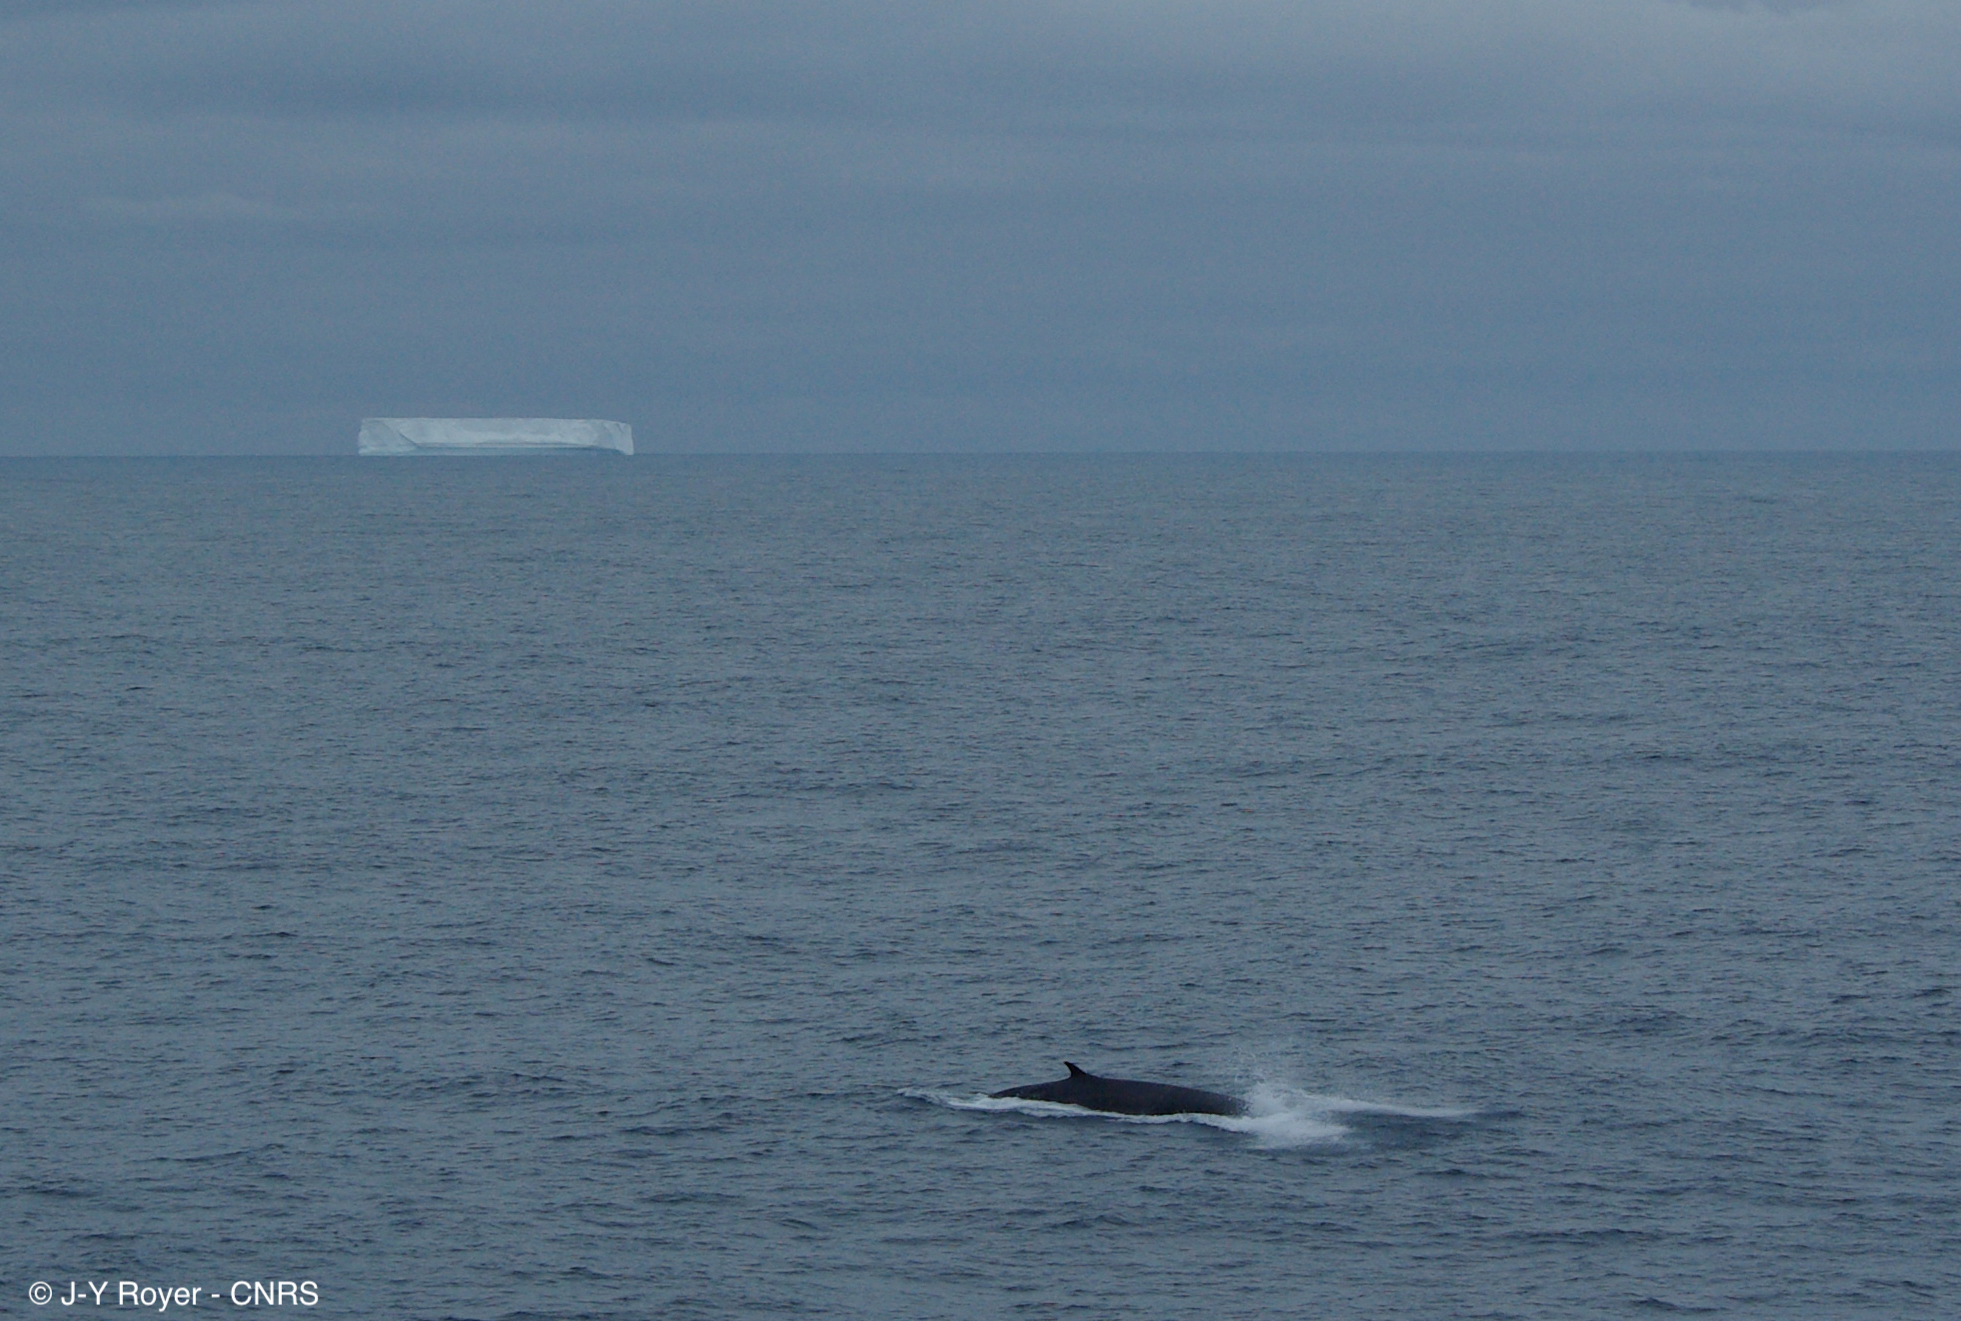 PHOTO: A fin whale surfaces at 58°S in the southern Indian Ocean in a photo captured in January 2010 from the R/V Marion Dufresne, the research vessel that collected hydrophone data for the new study.